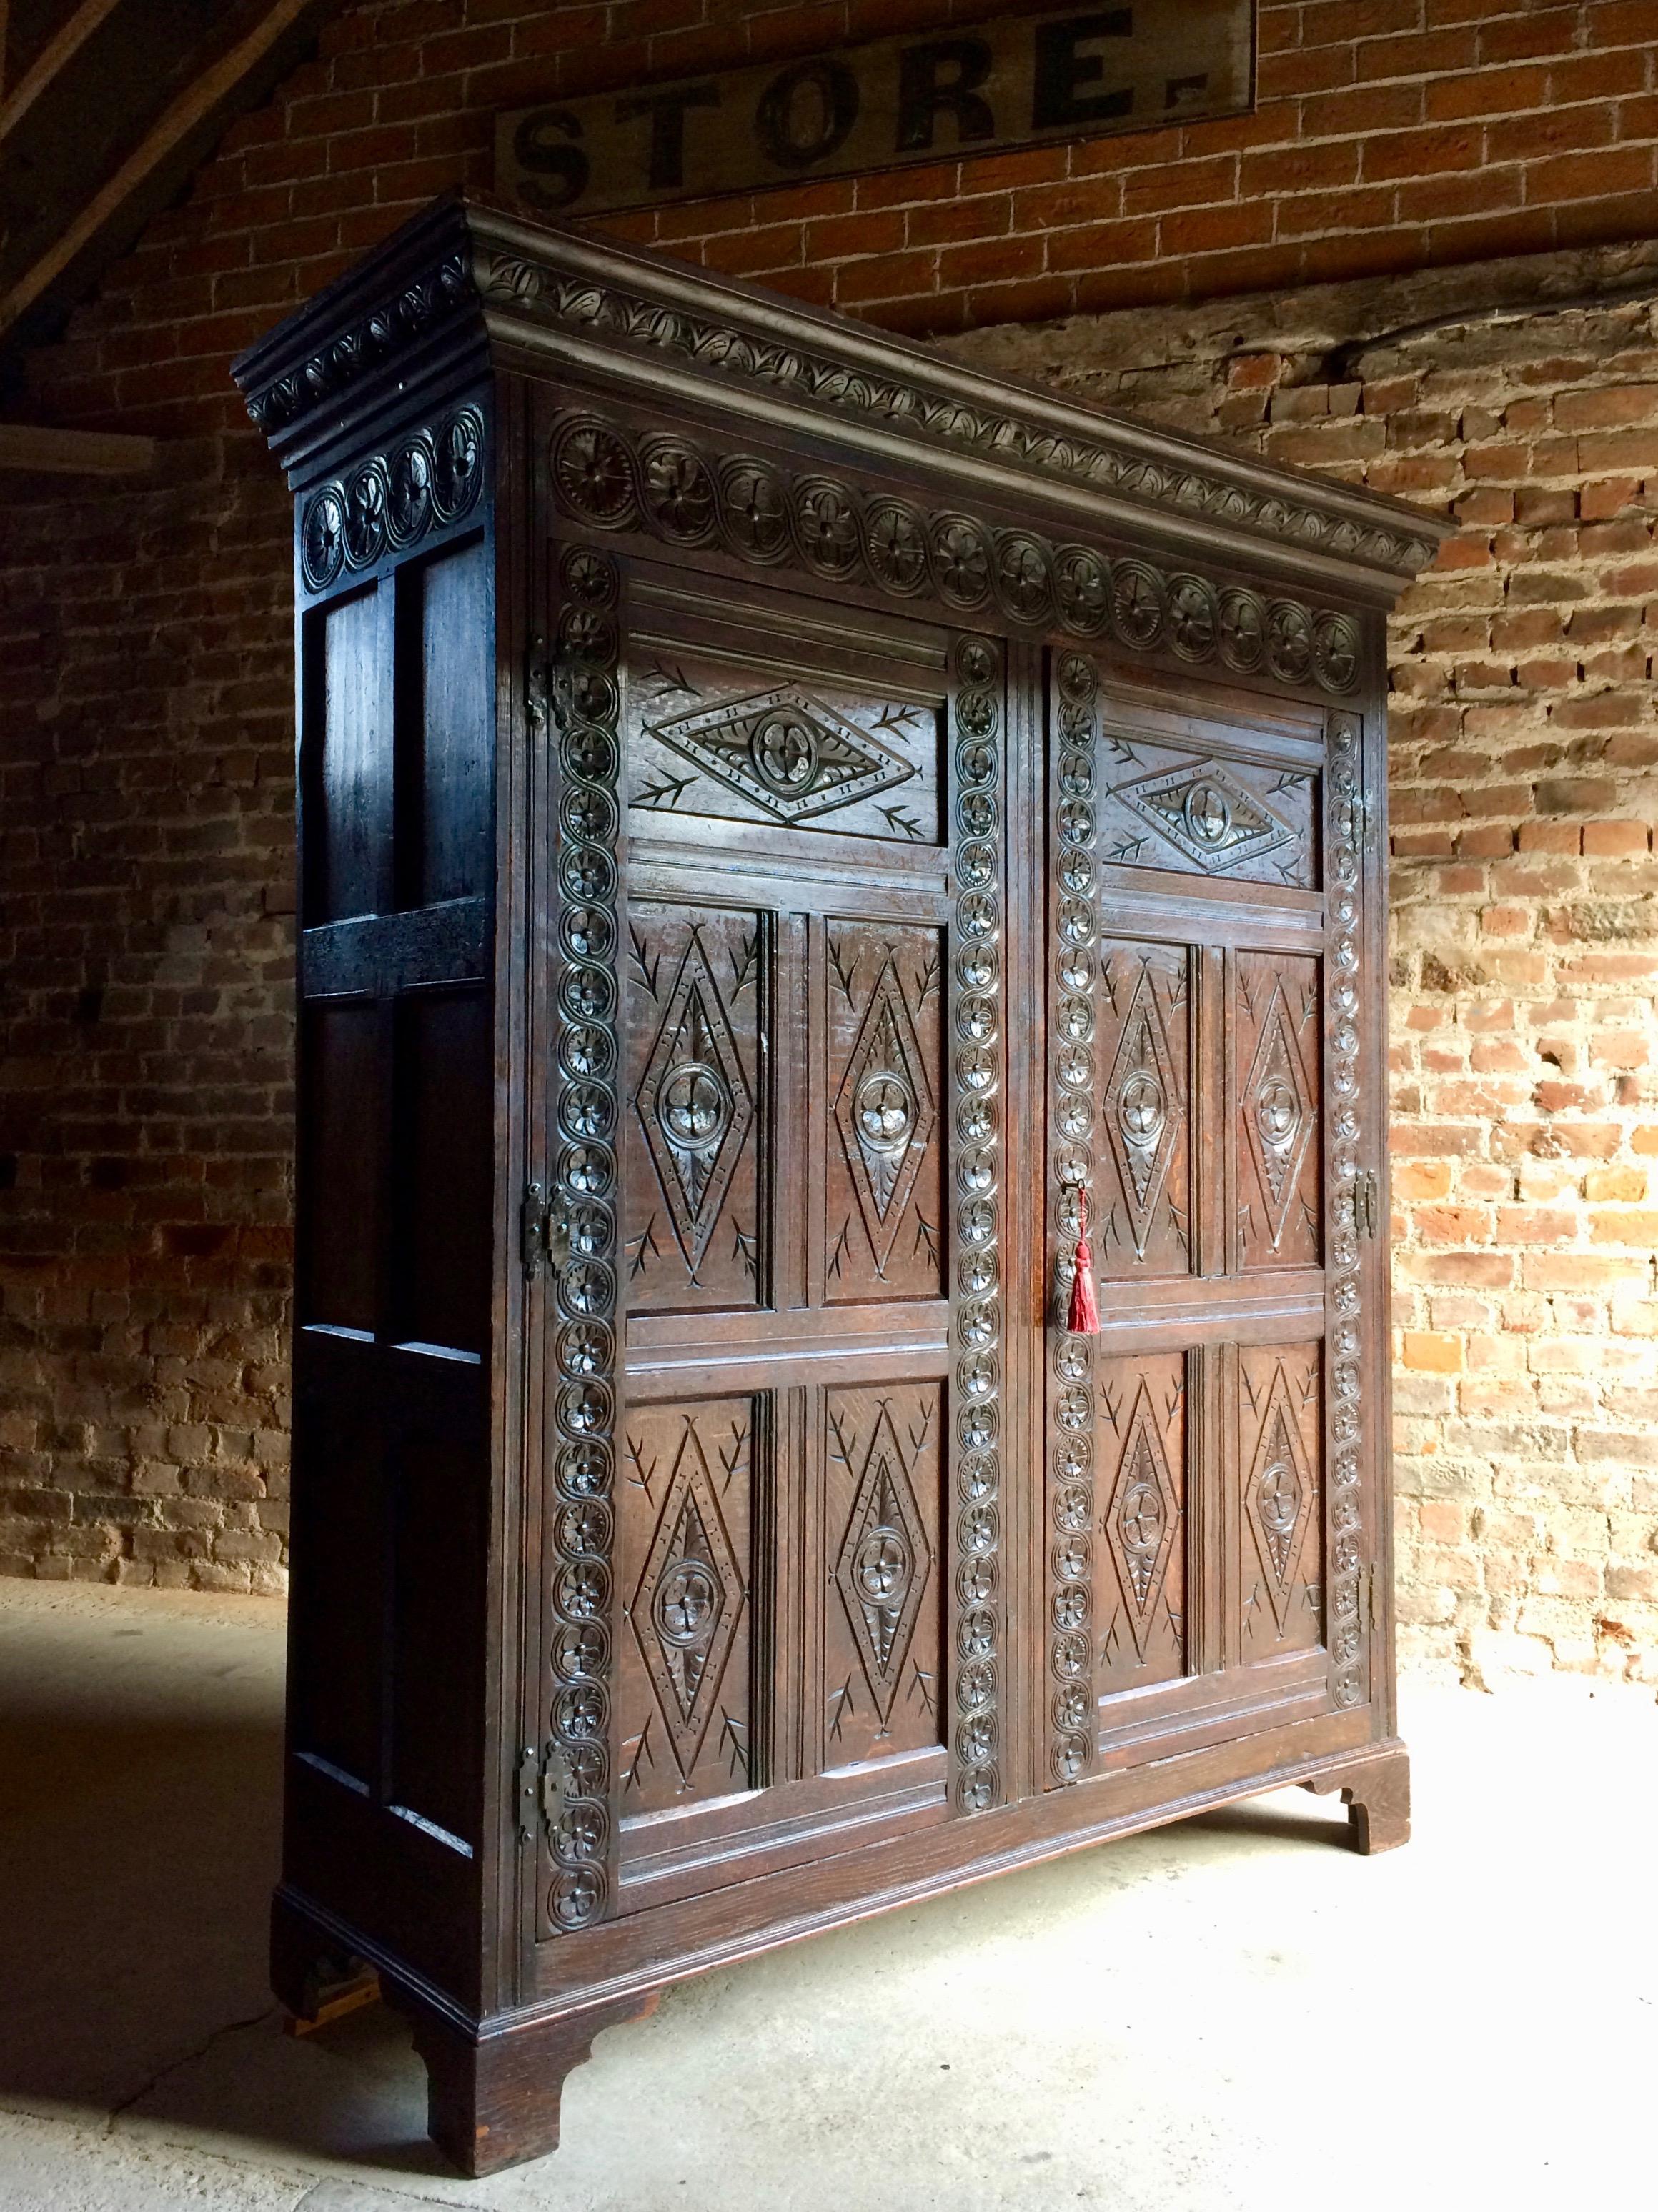 A magnificent antique 17th century style solid English oak heavily carved livery or hall cupboard circa 1790, the rectangular carved cornice top above two heavily carved panel cupboard doors with original iron butterfly hinges supported by rose head